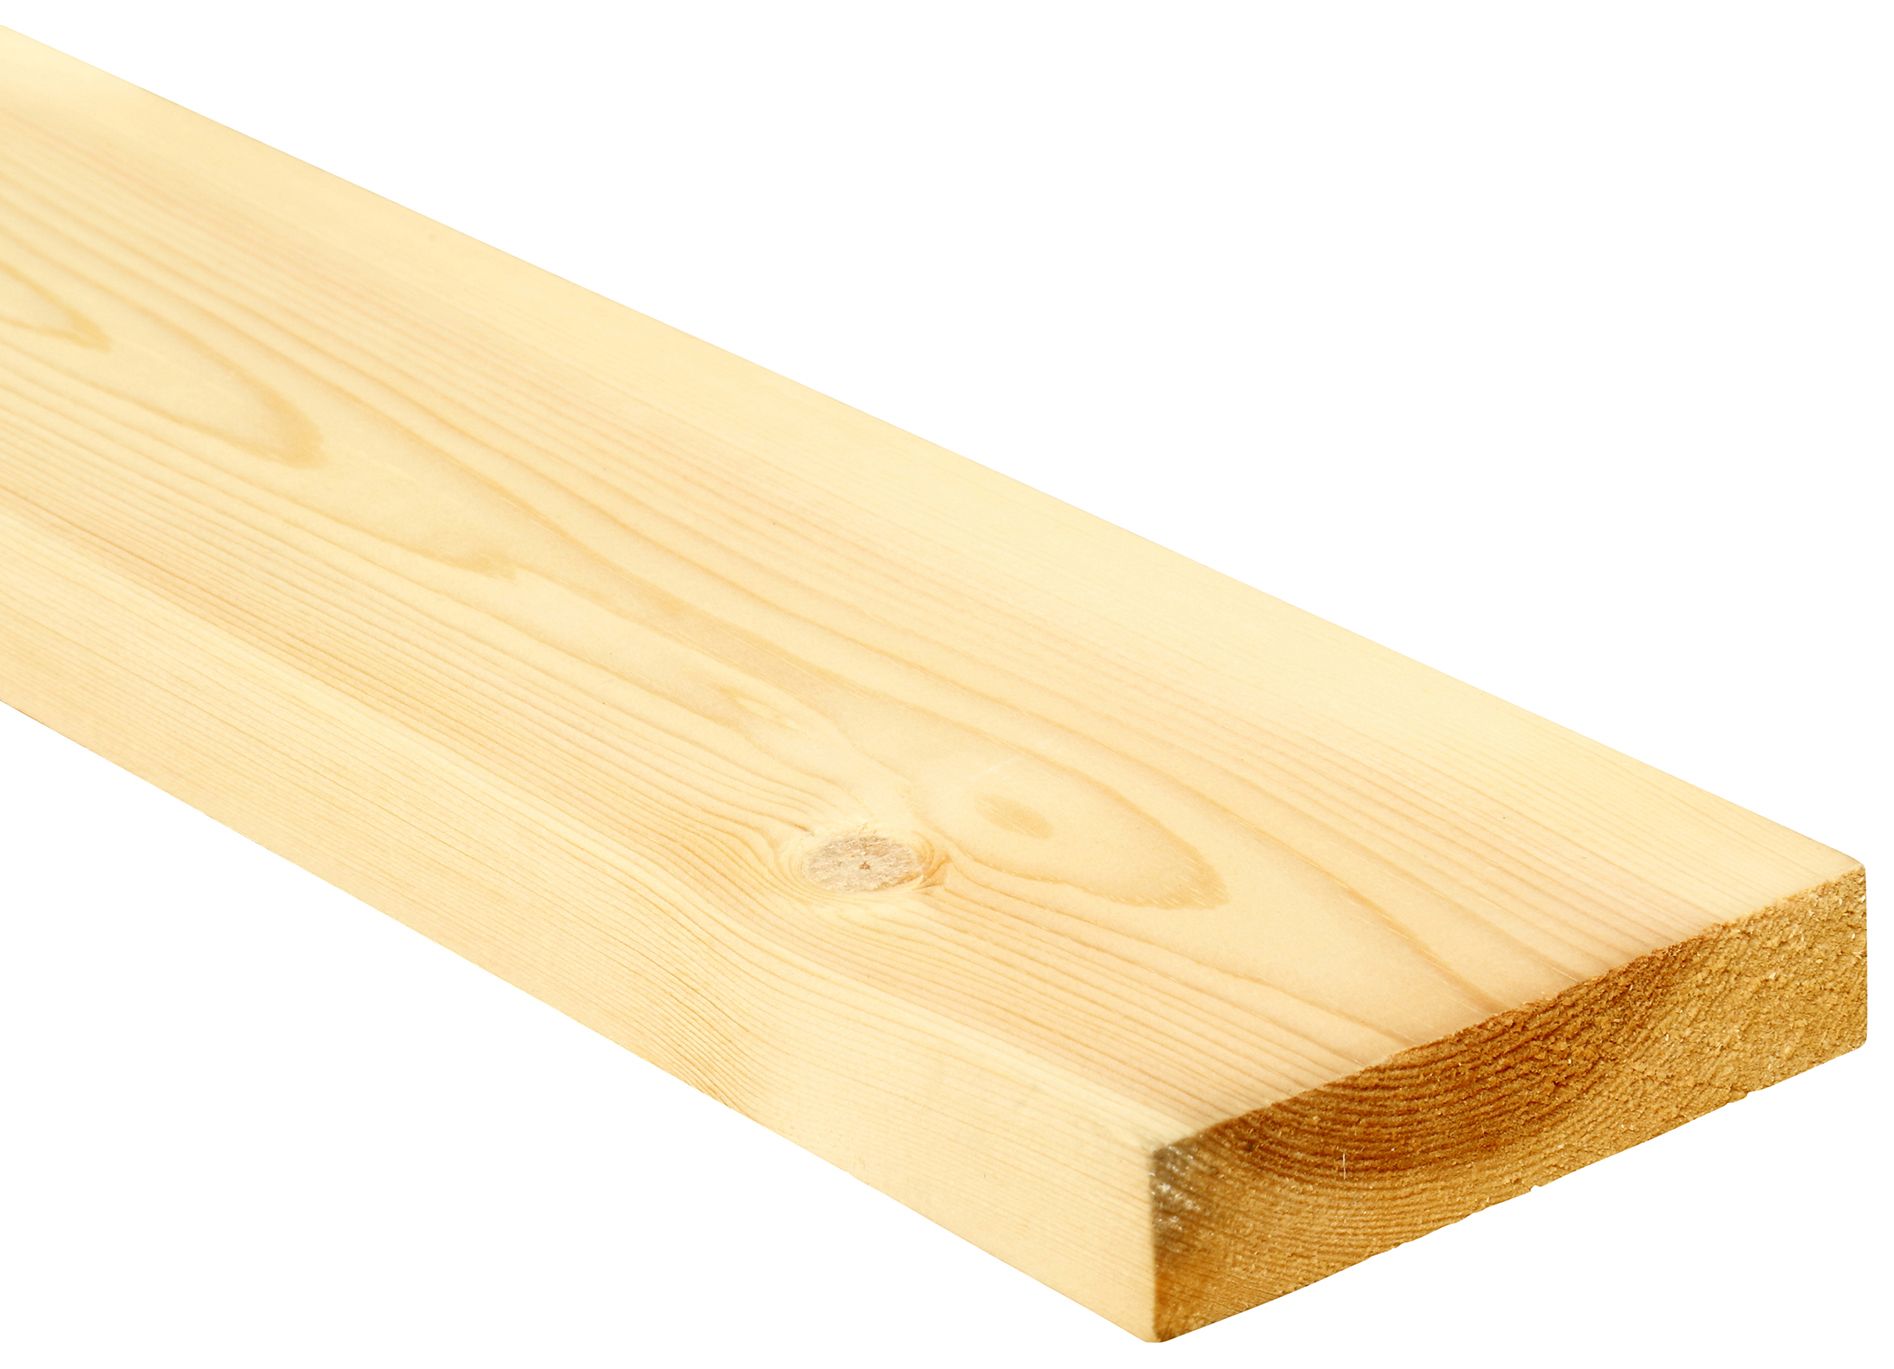 Image of Wickes Redwood PSE Timber - 20.5 x 94 x 2400mm